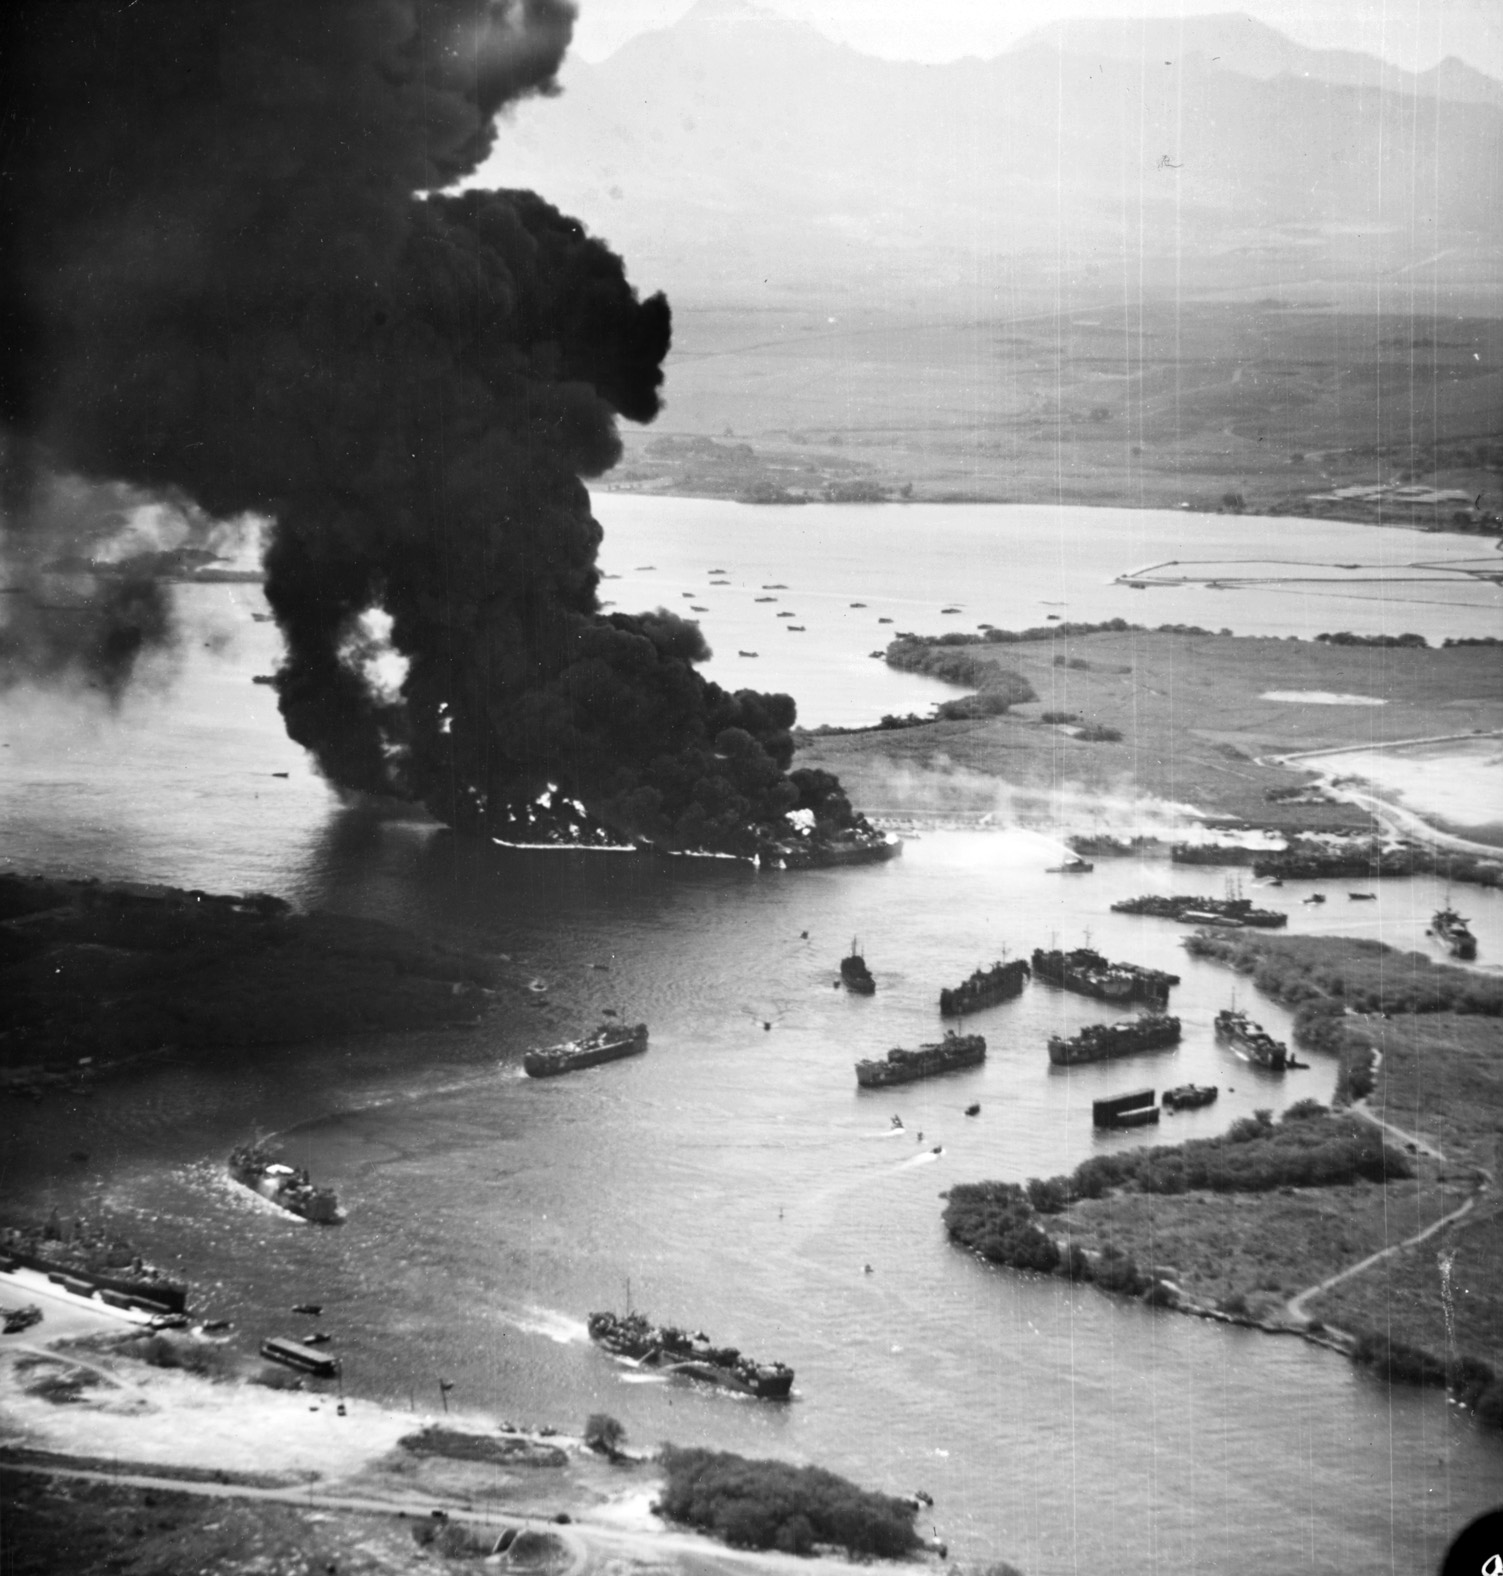 This aerial view of Pearl Harbor’s West Loch in flames clearly shows burning LSTS at Tares 8 and 9 while other LSTs attempt to rapidly maneuver away from the conflagration toward safety. Several vessels clustered to the right in this image appear to remain stationary despite the threat.